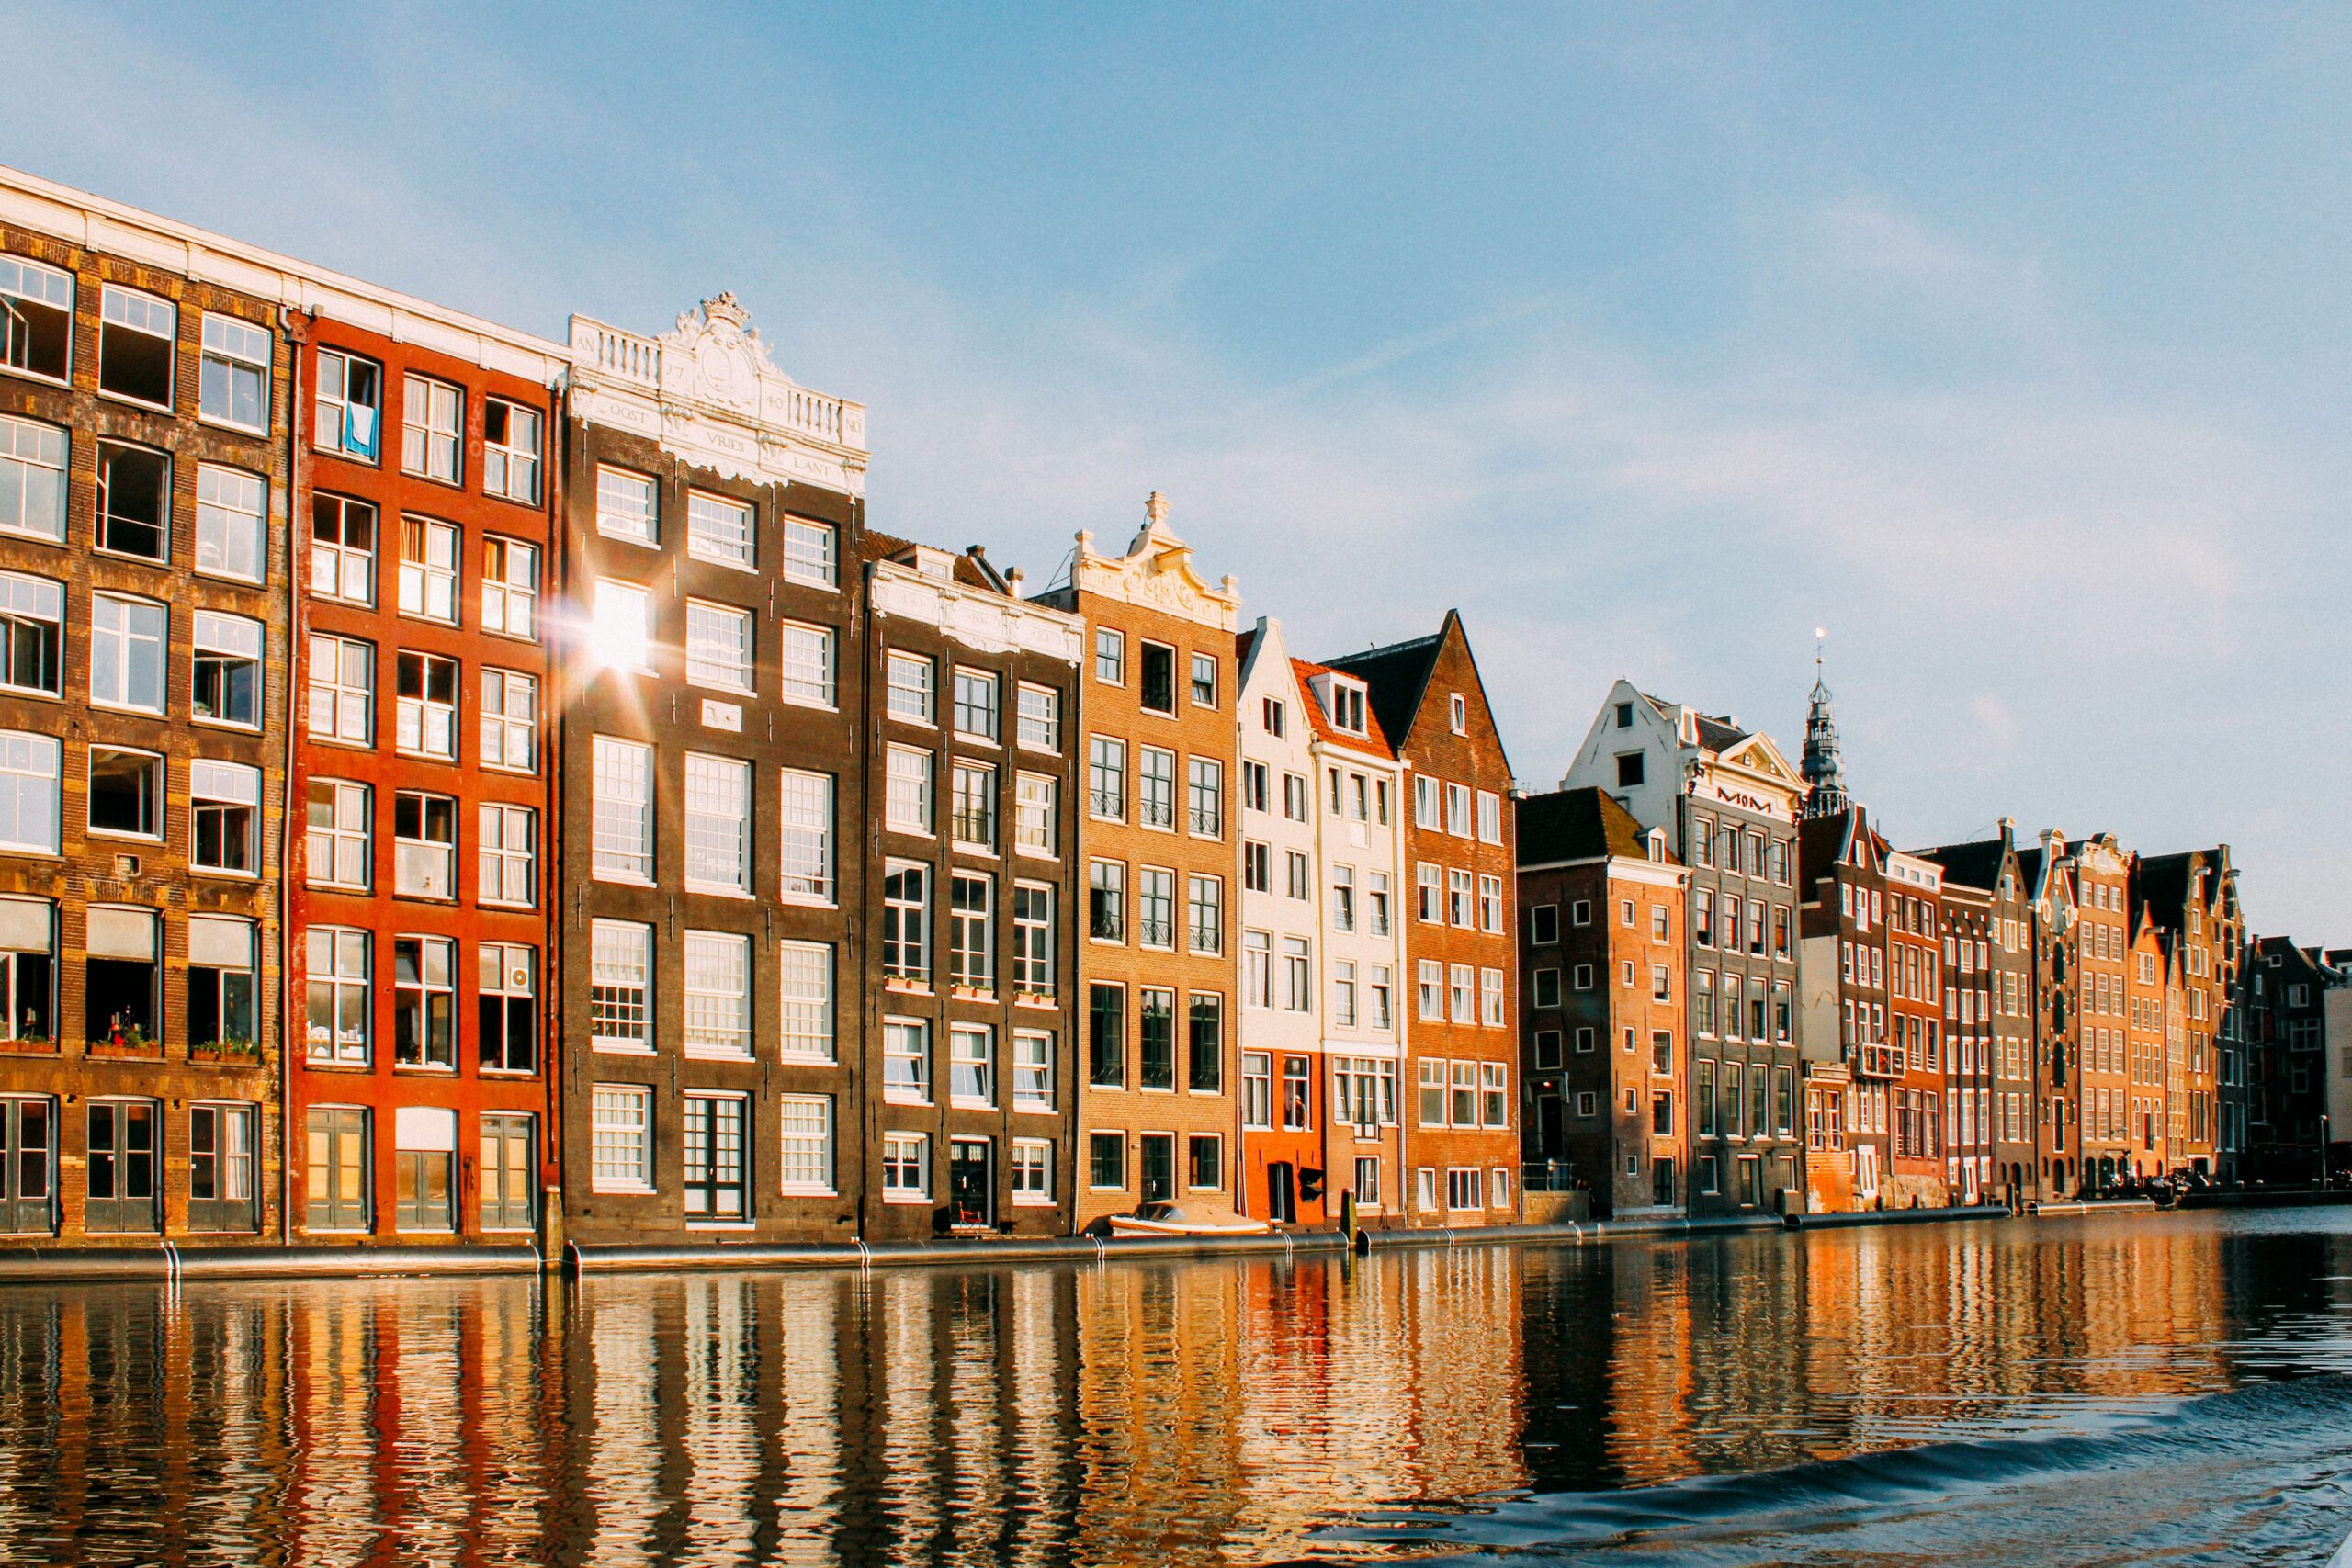 Amsterdam is one of the top cities in Europe for travelers. 
Pictured: a canal and historic buildings in Amsterdam on a bright sunny day 